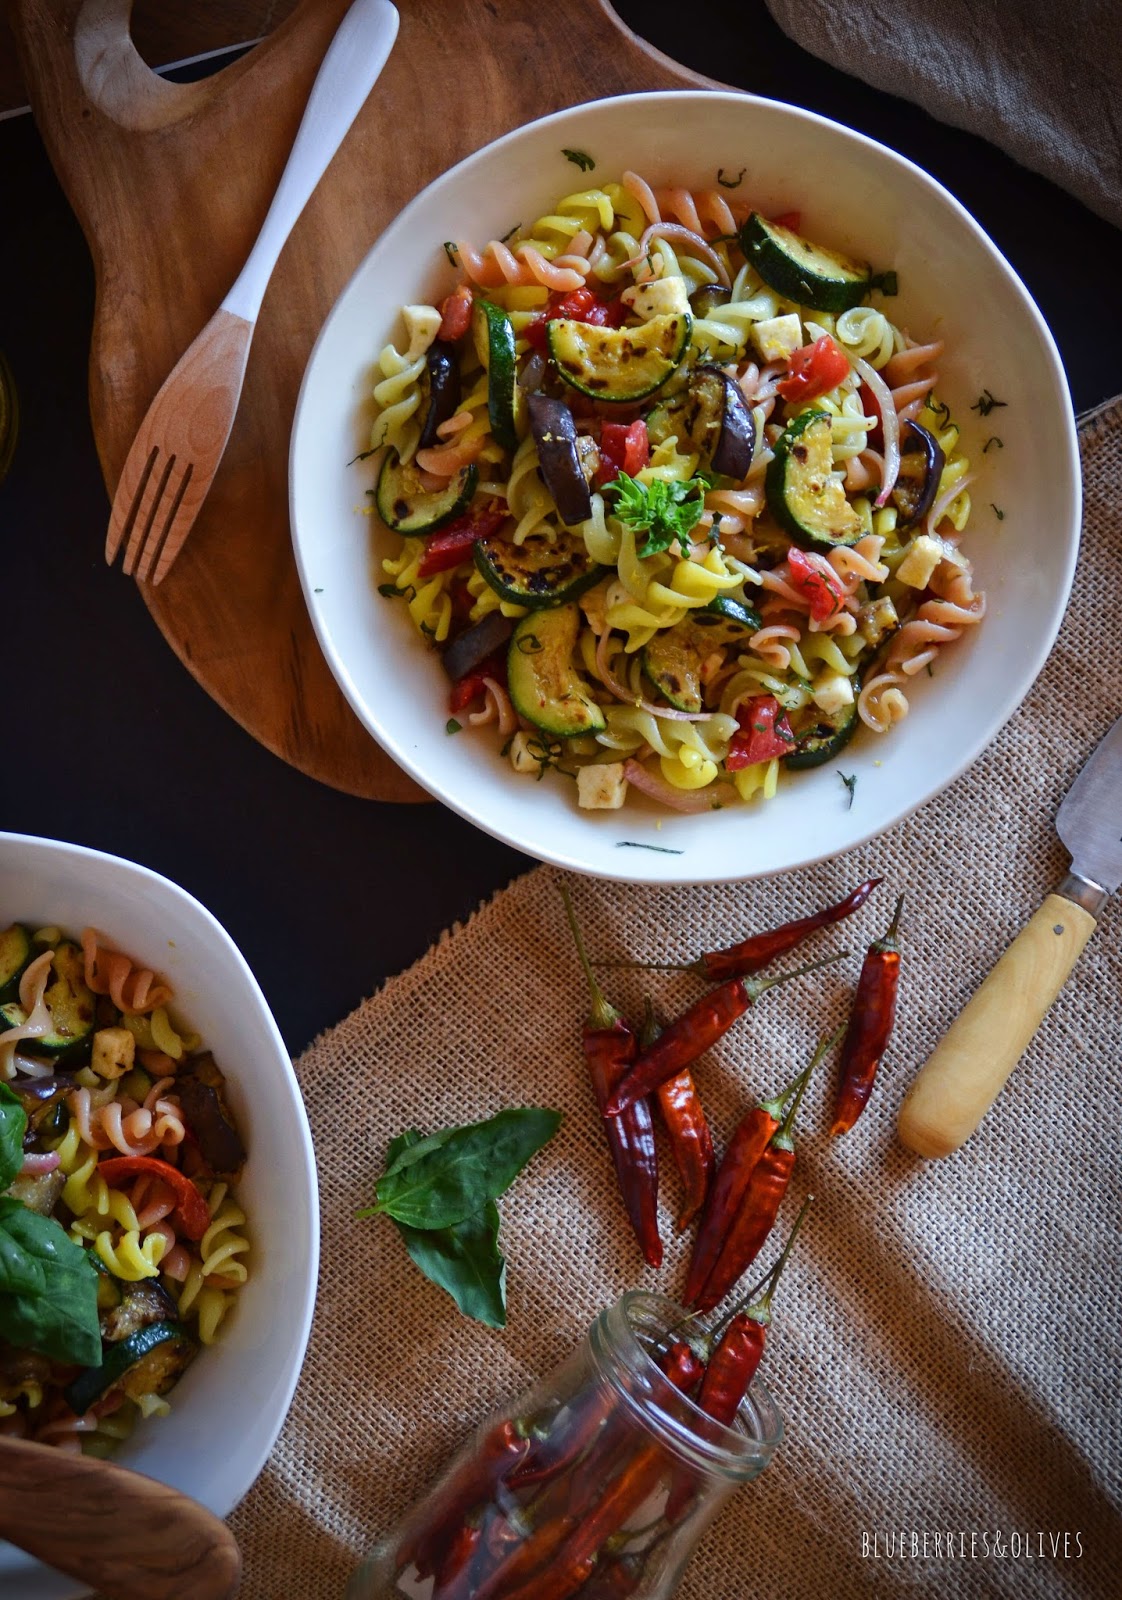 PASTA AND ROASTED VEGETABLES SALAD WITH GARLIC, LEMON AND BASIL DRESSING... and a stroll through the south of Italy